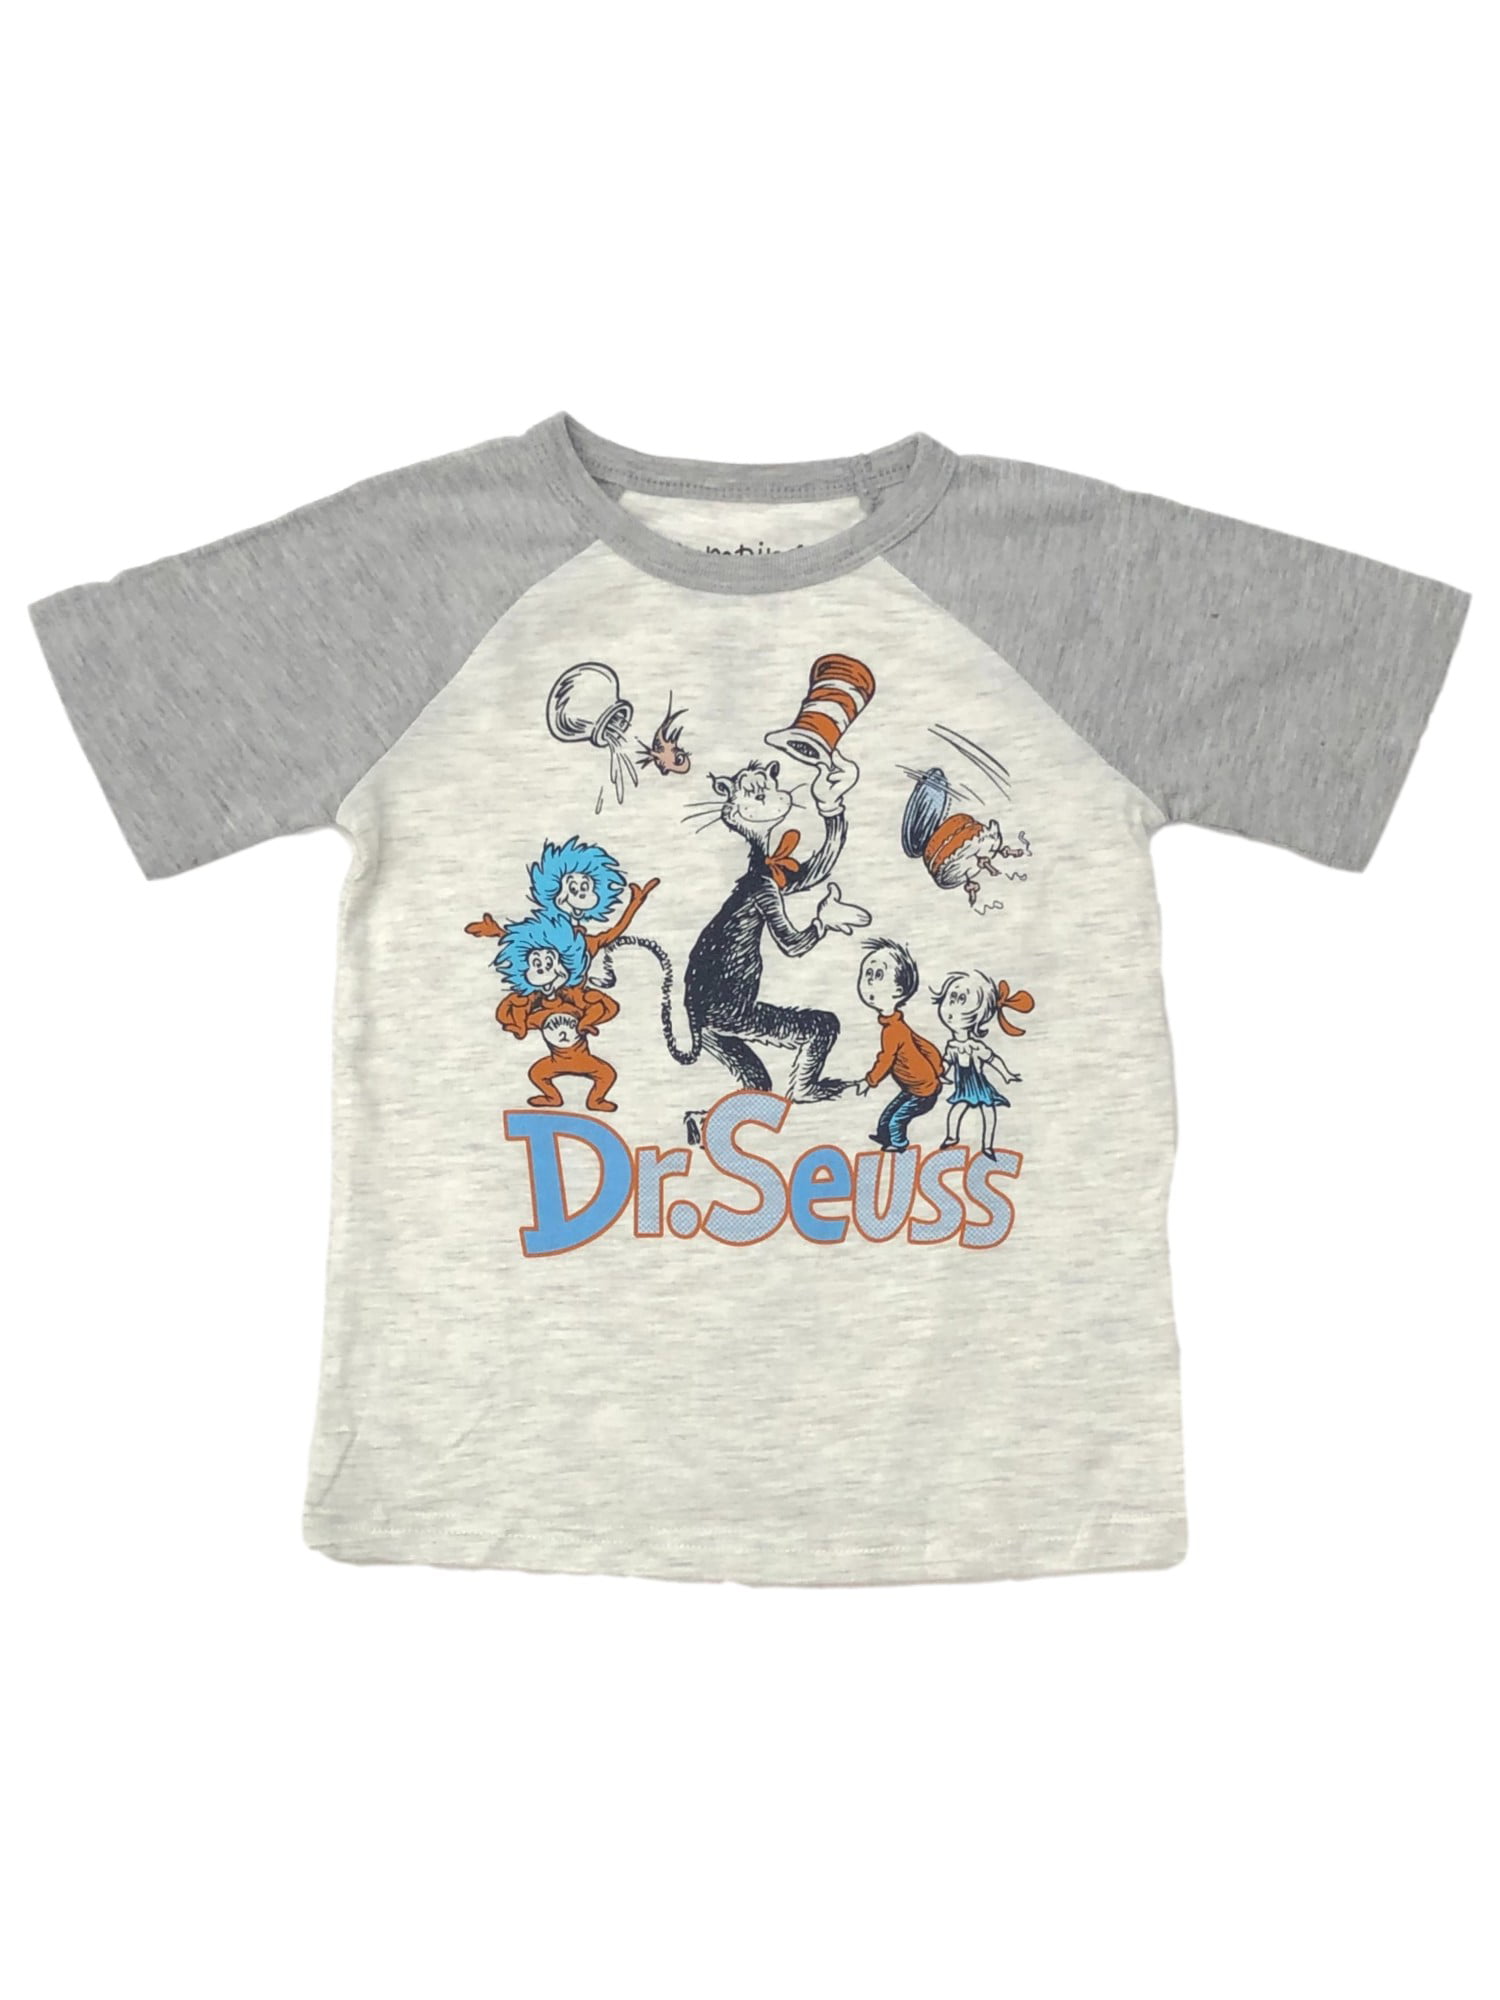 The Places You'll Go!" Raglan Tee Jumping Beans Toddler Dr Seuss "Oh 3T 